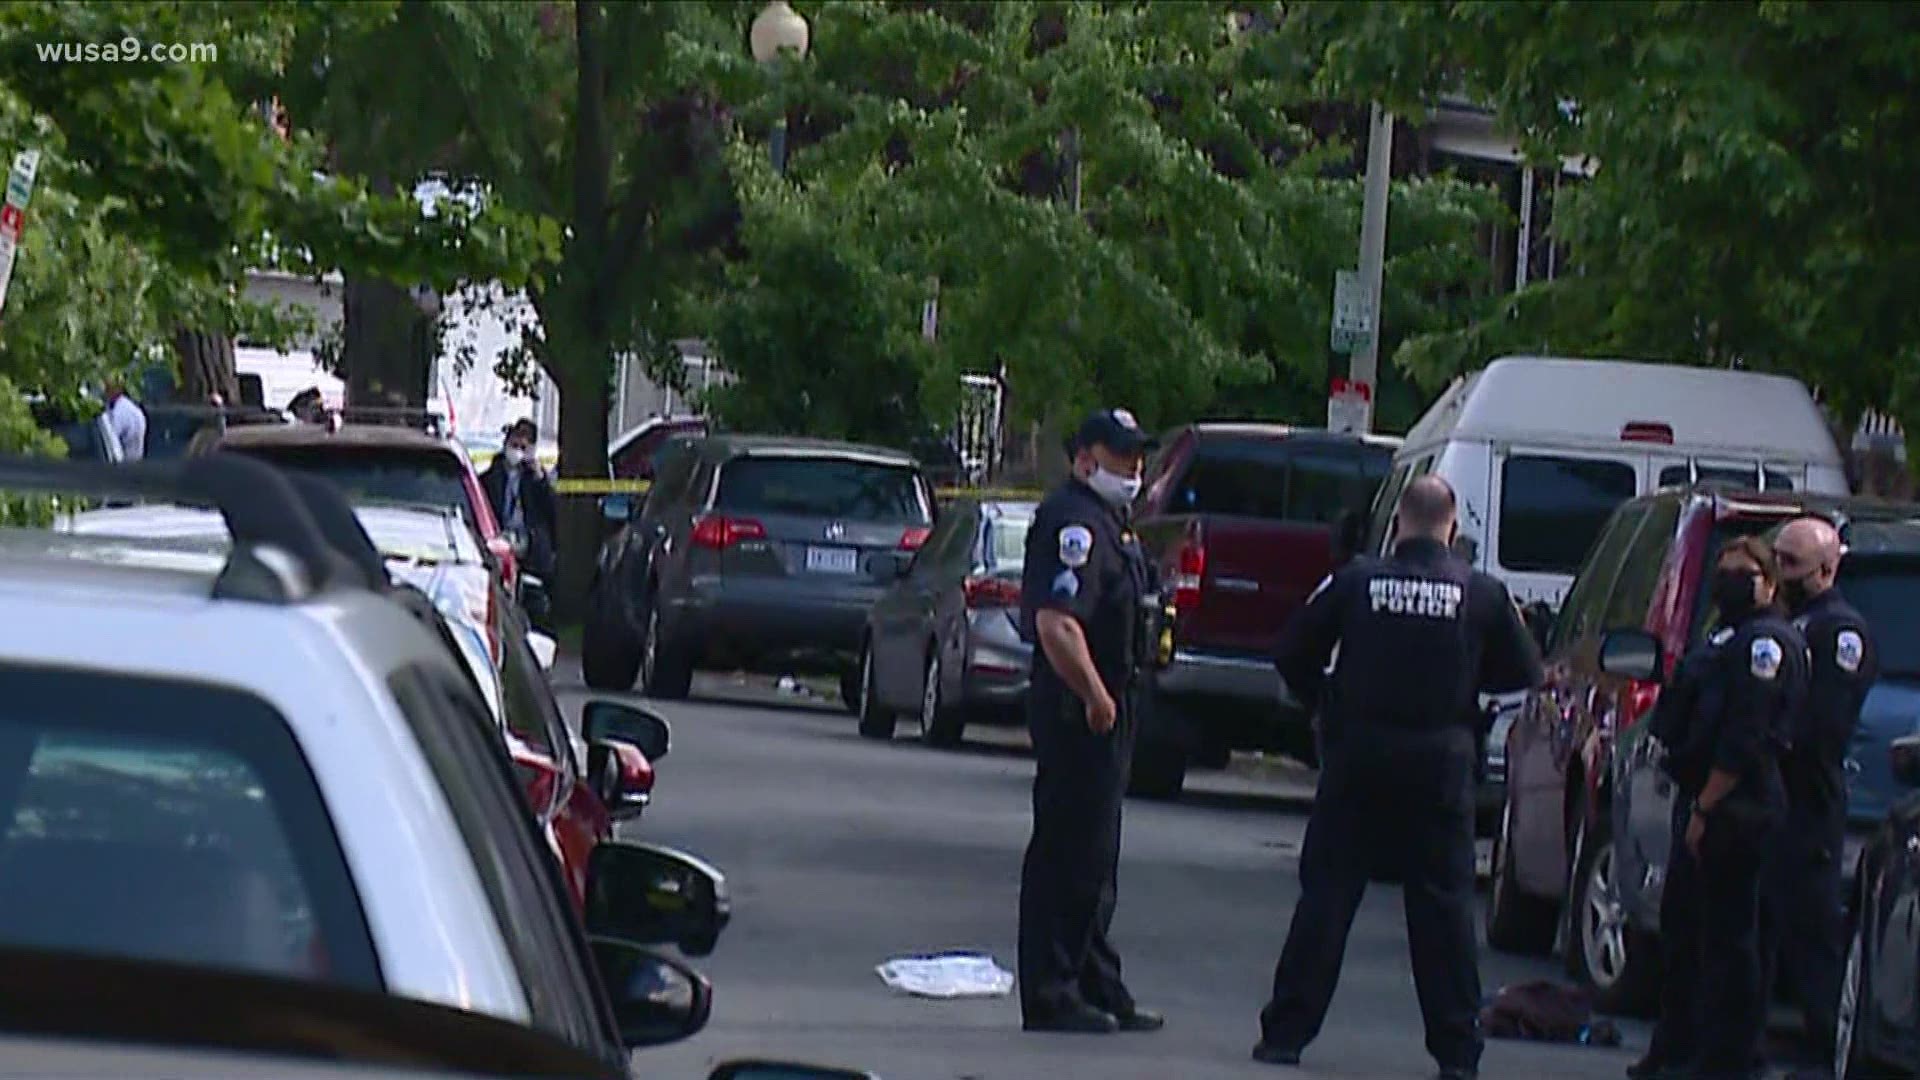 The scene is still active, with the Metropolitan Police Department investigating what exactly led to the shooting.